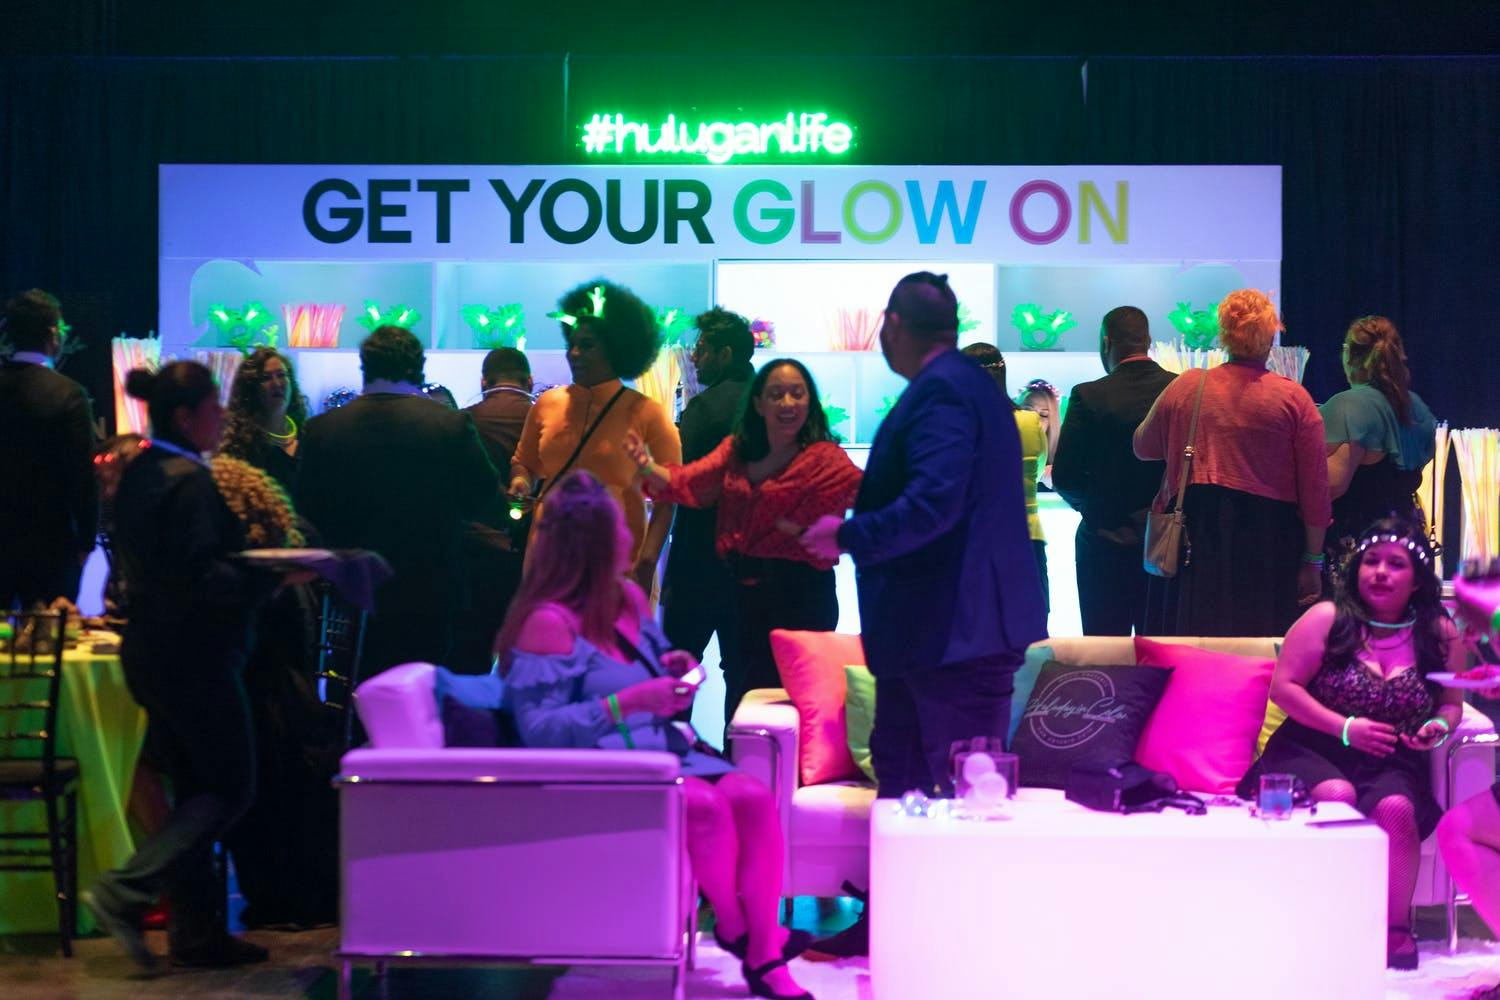 Glow-Themed Hulu Party With Glow Paint Activities | PartySlate